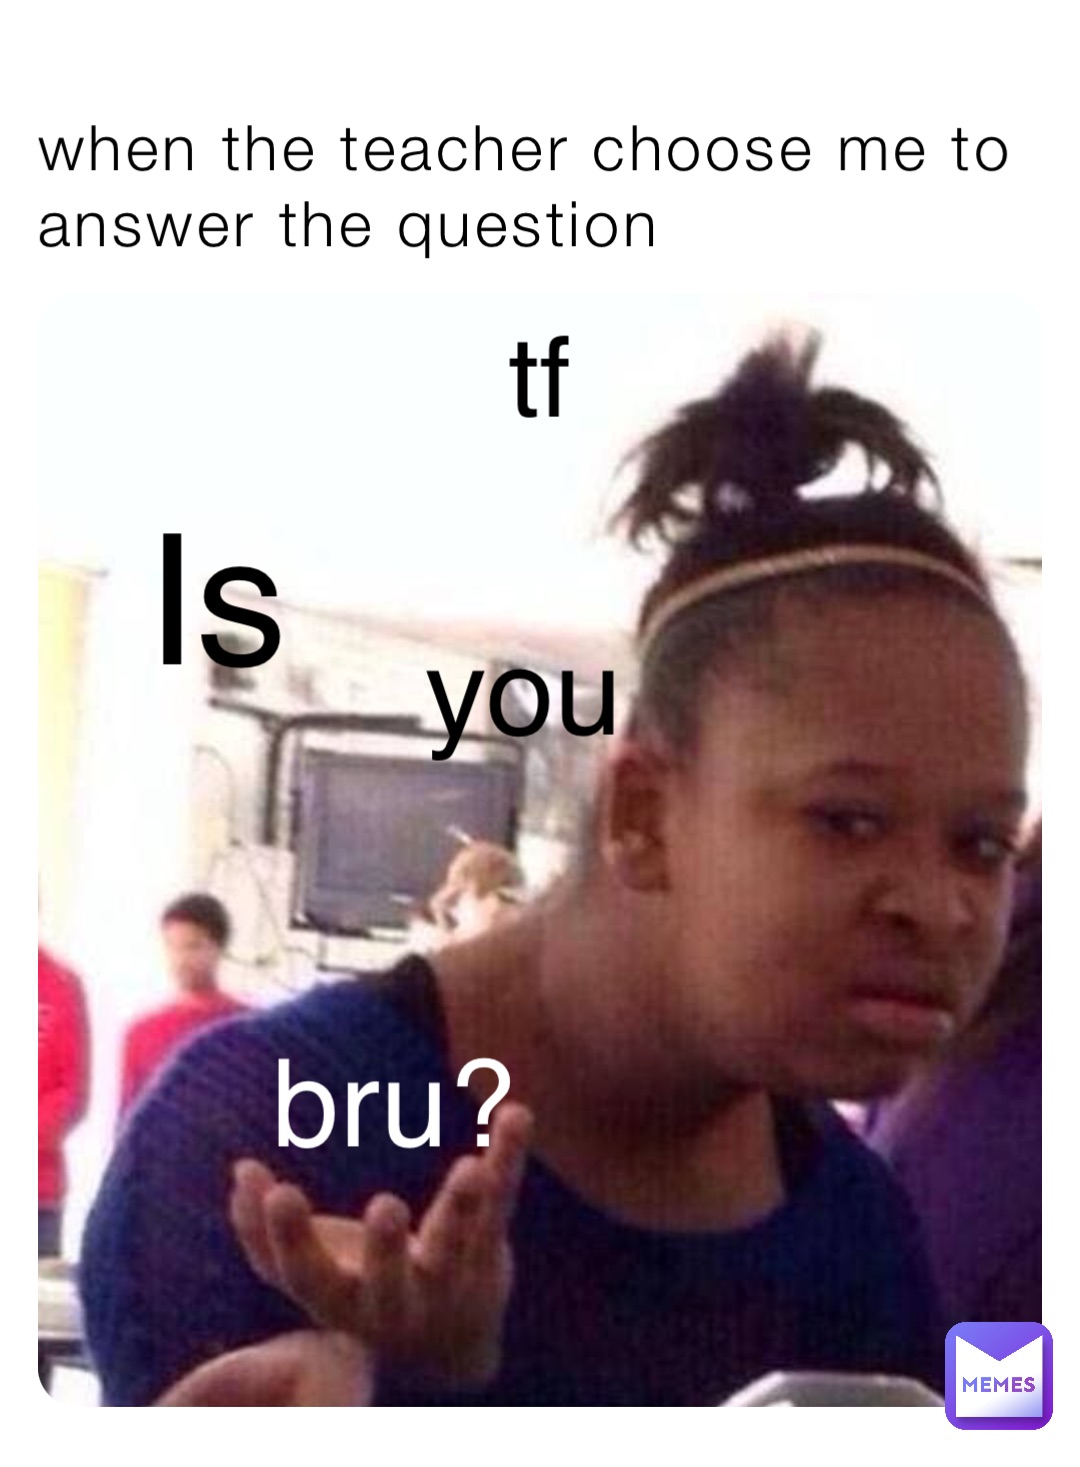 tf when the teacher choose me to answer the question Is you bru?